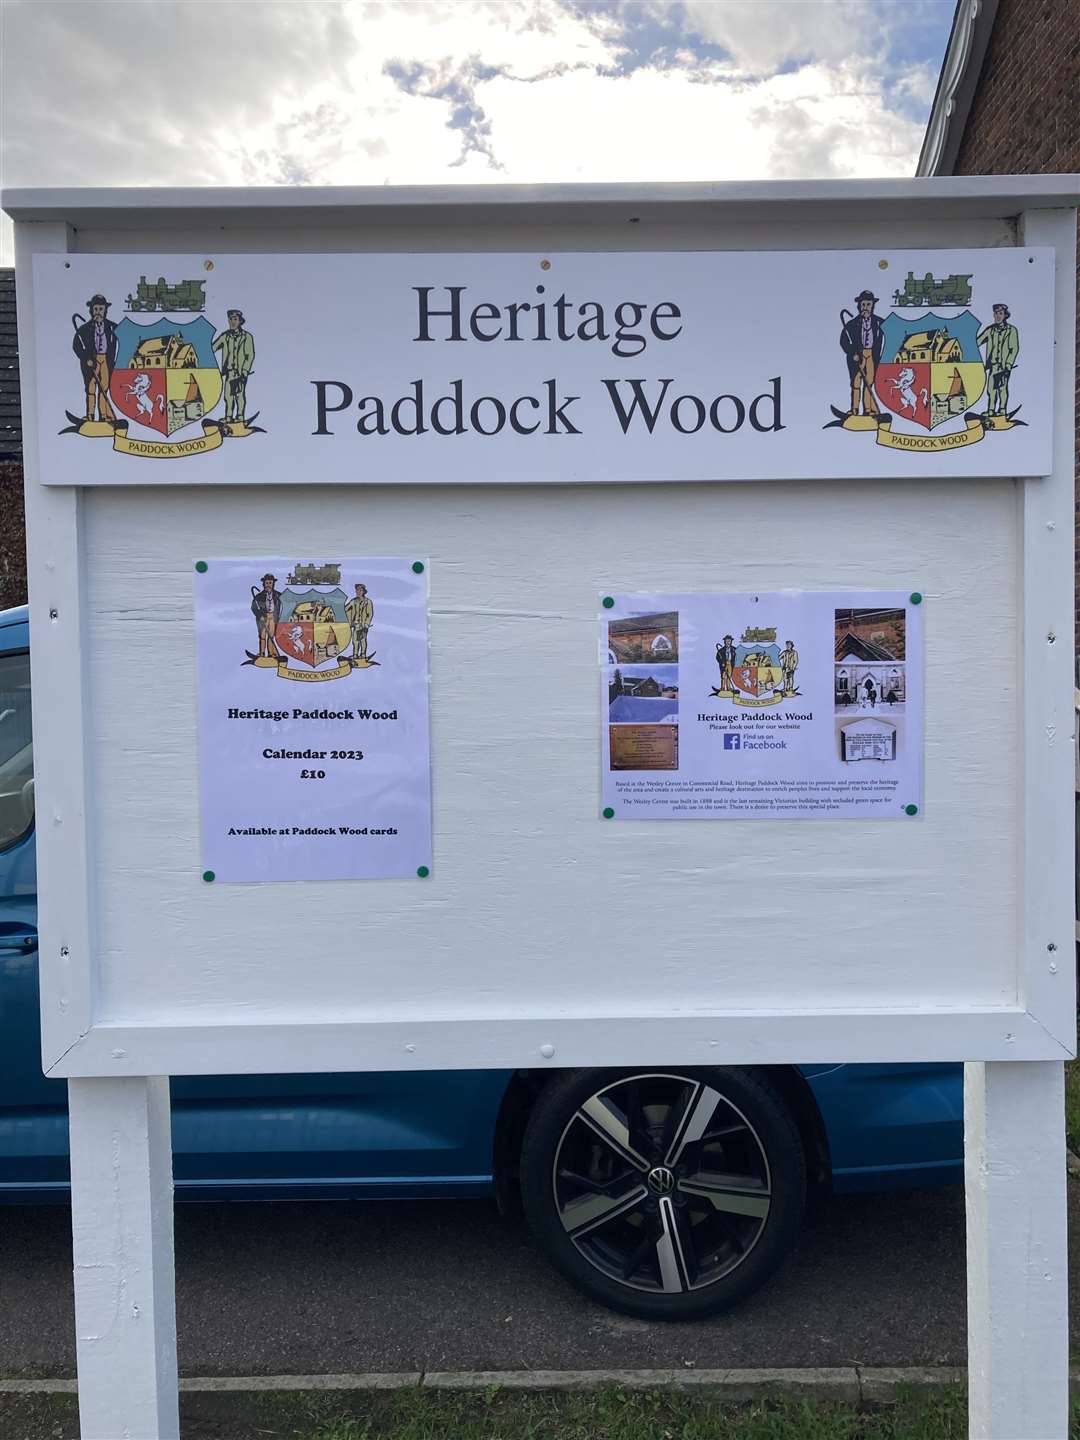 The centre is home to Heritage Paddock Wood